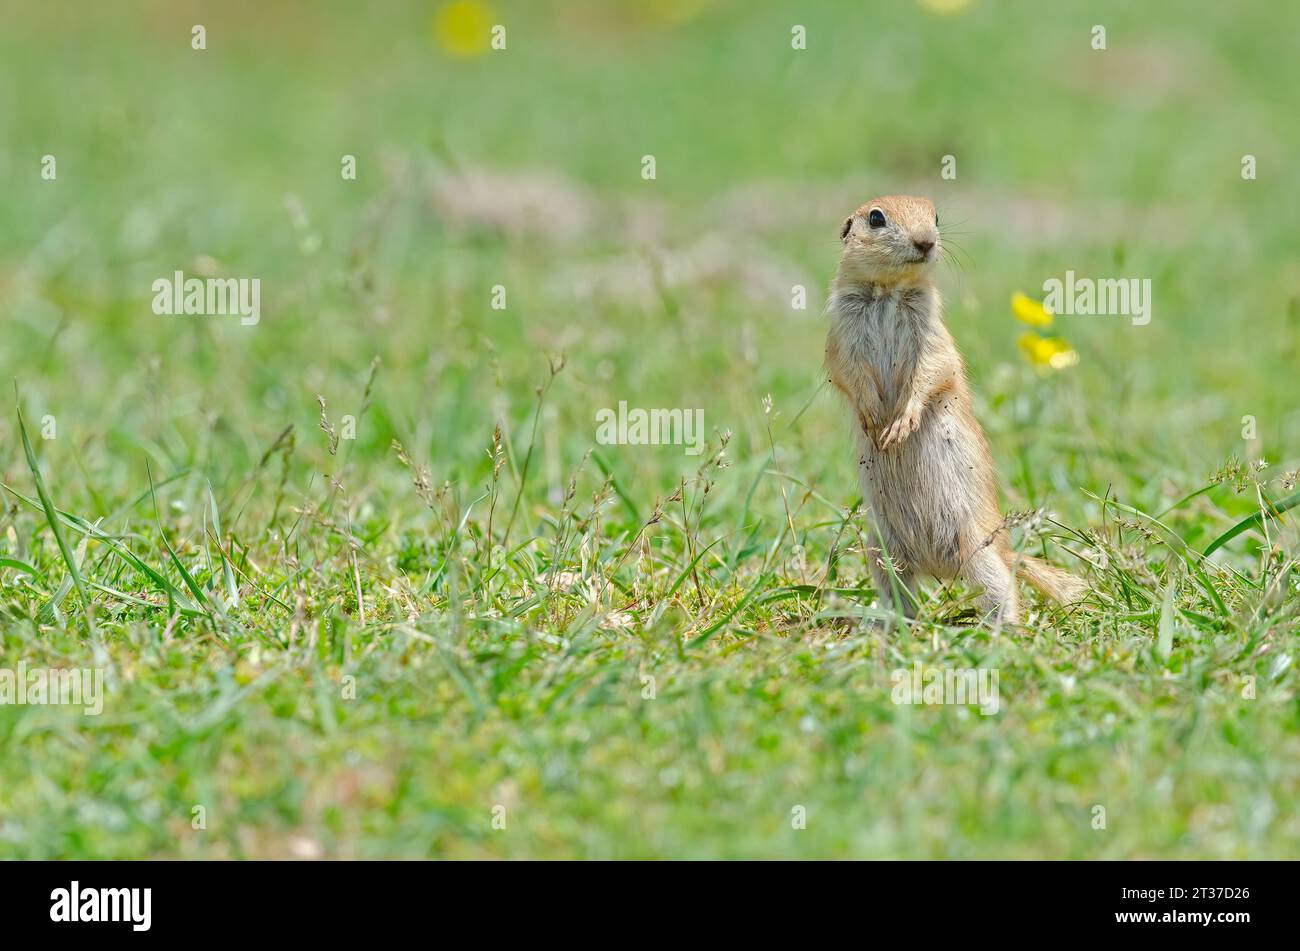 Baby ground squirrel standing. Cute funny animal ground squirrel. Green nature background. Stock Photo